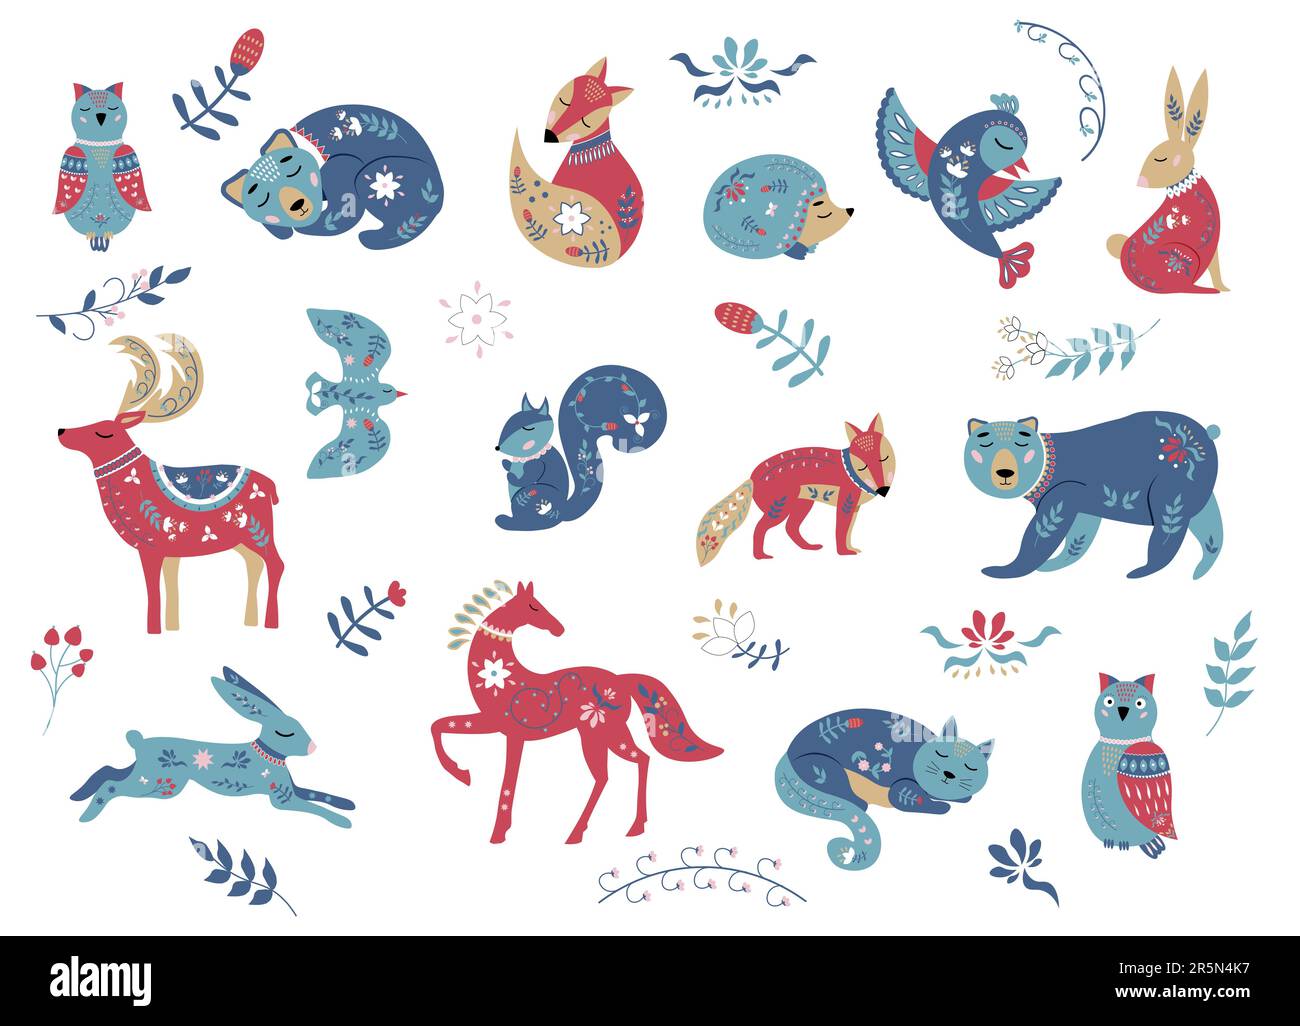 Animals with floral ornaments. Bear, horse and deer, cats and hares, foxes and squirrels, birds and owls. Elements of folk art design. Stock Vector